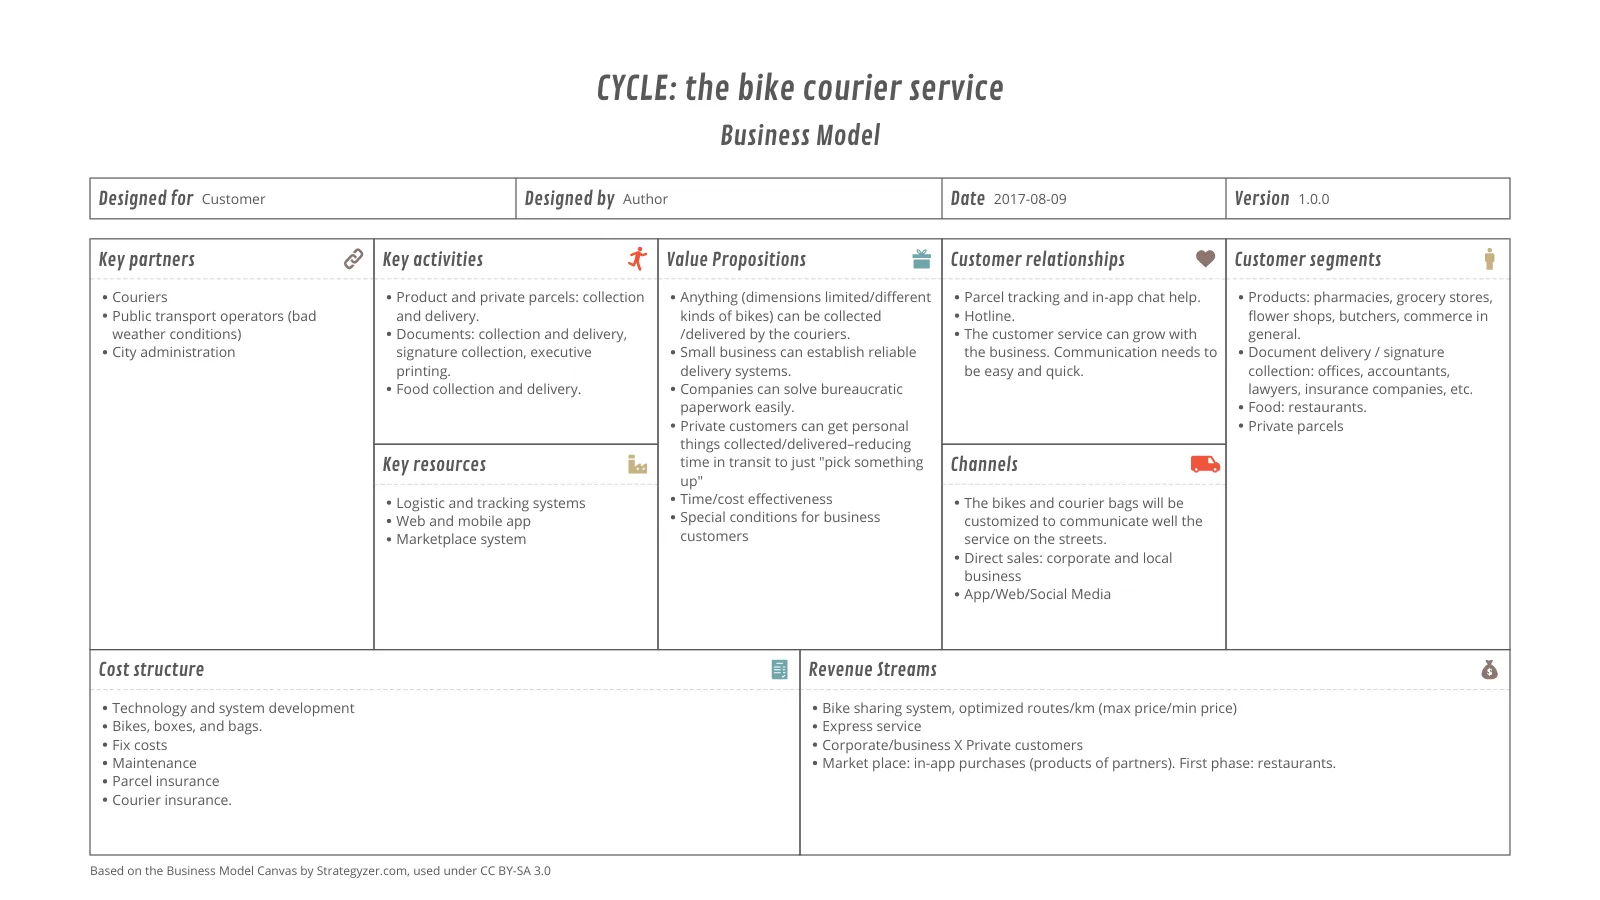 Business Model Canvas example: CYCLE: the bike courier service